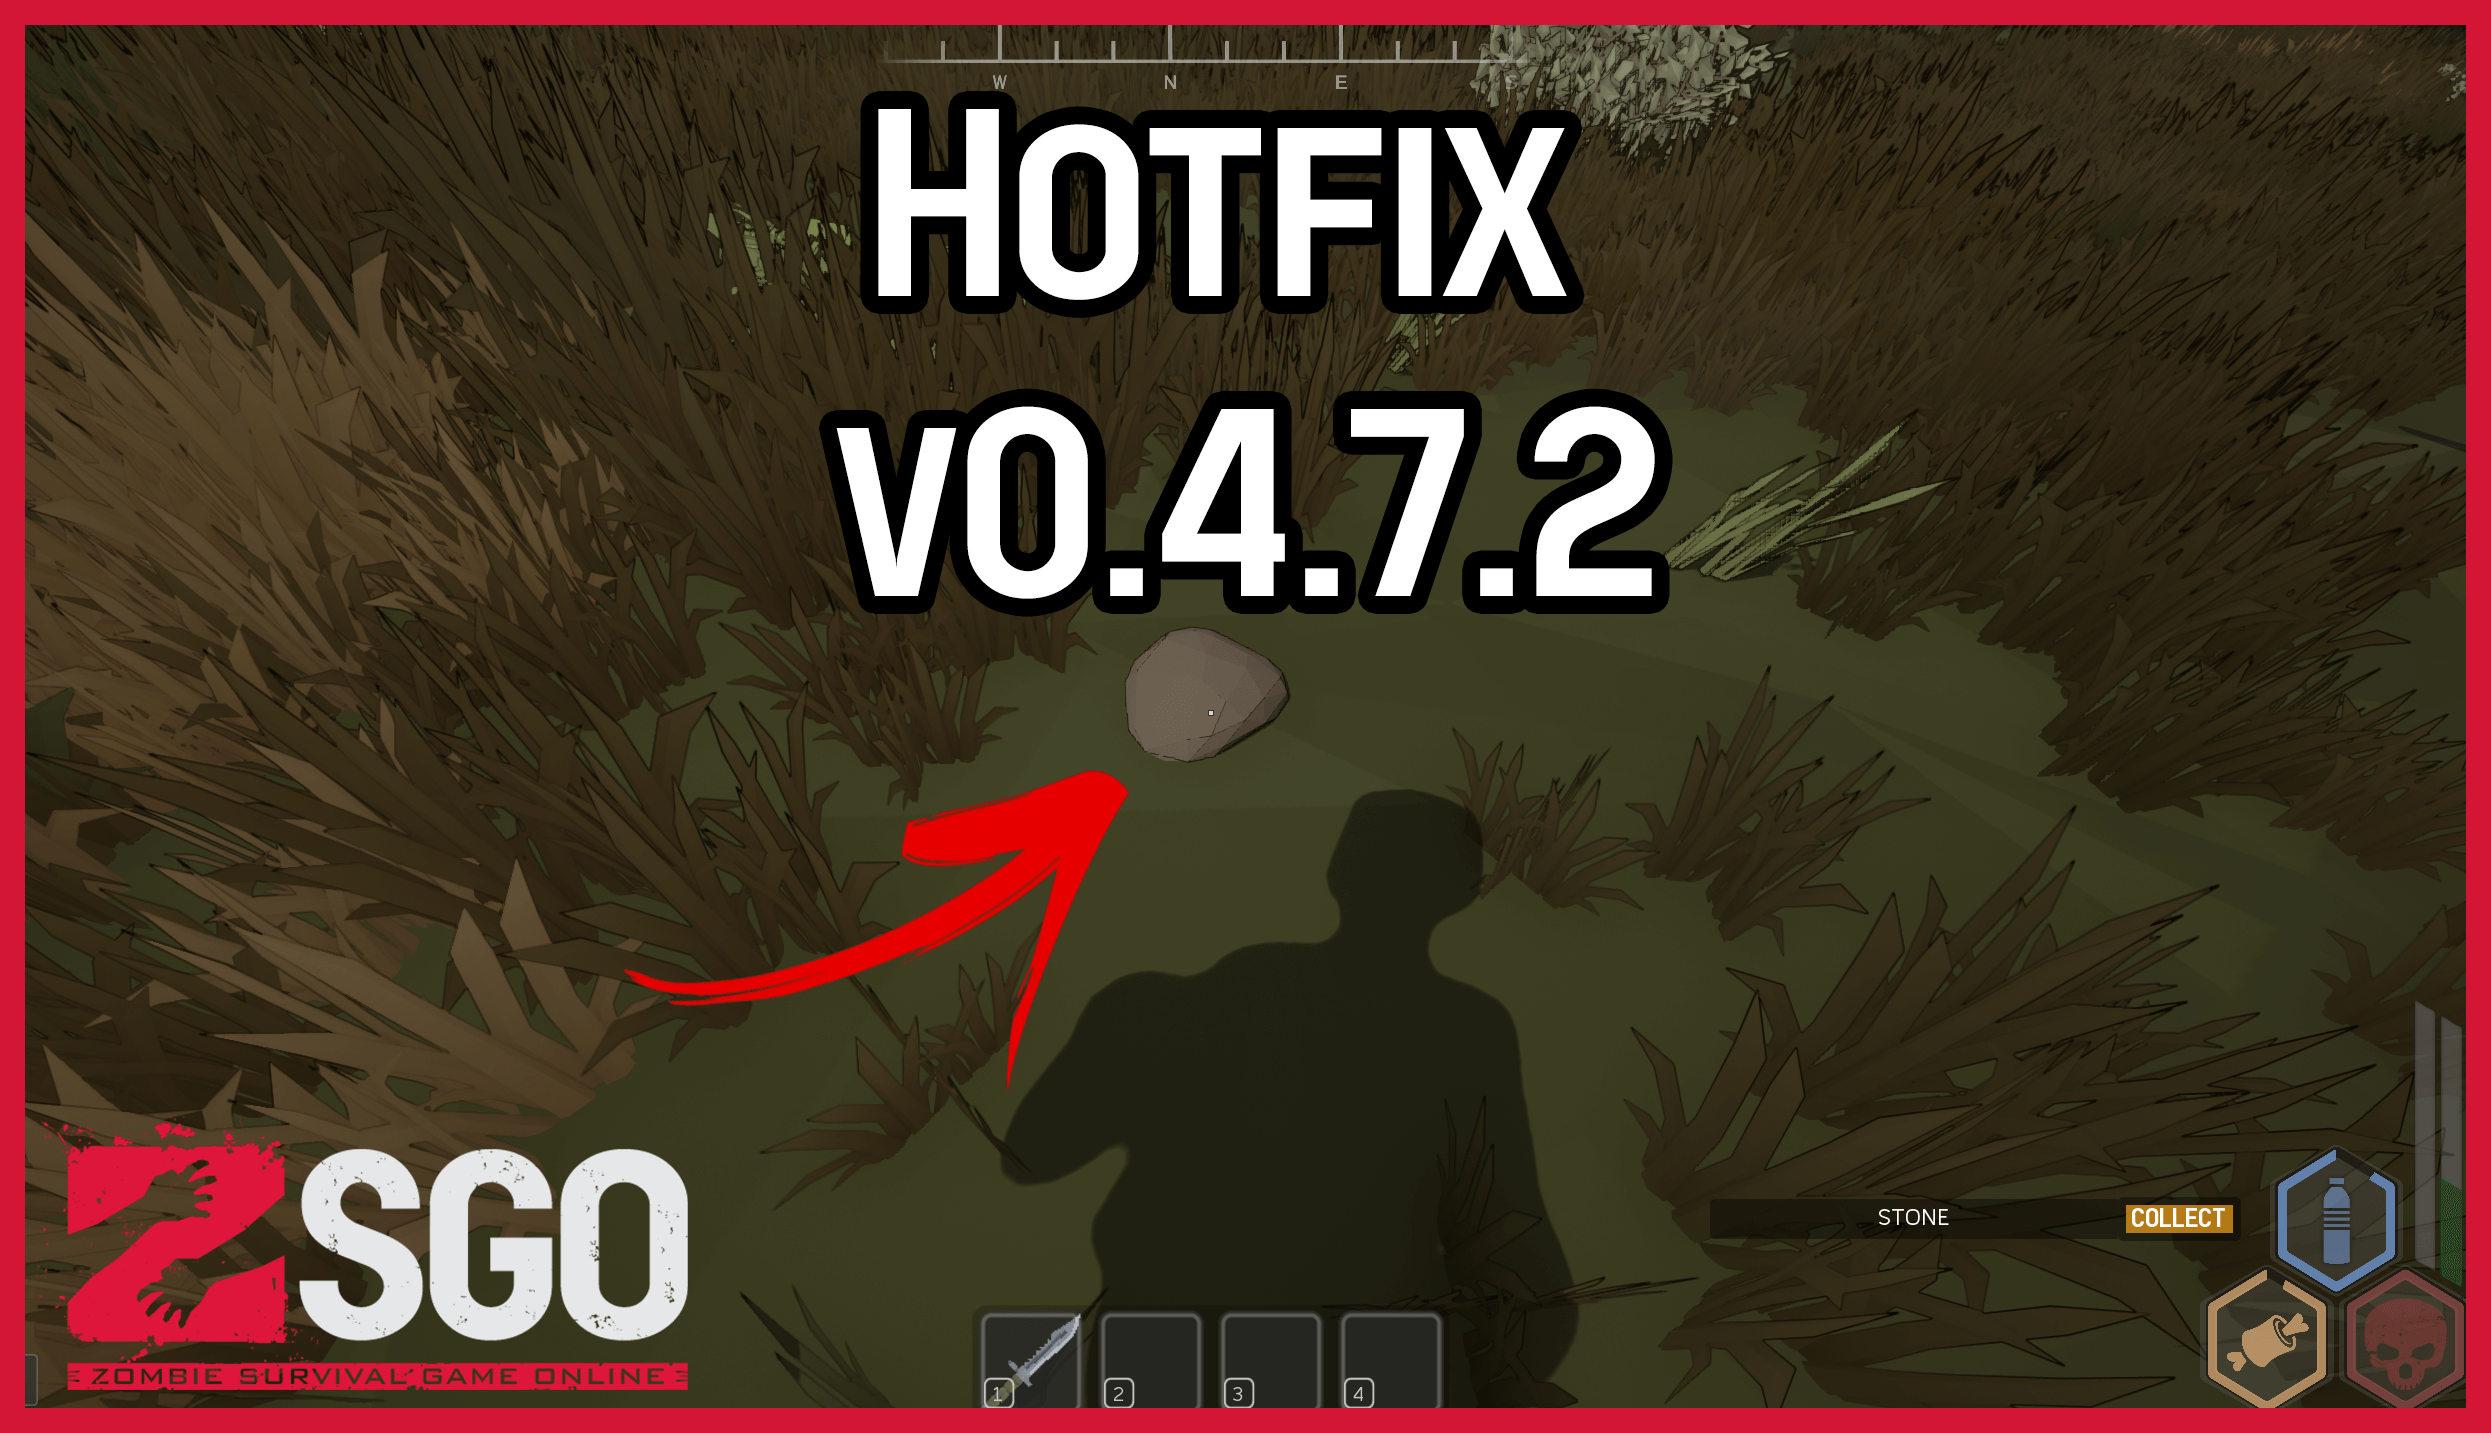 The Zombie Survival Game Online February hotfix v0.4.7.2.